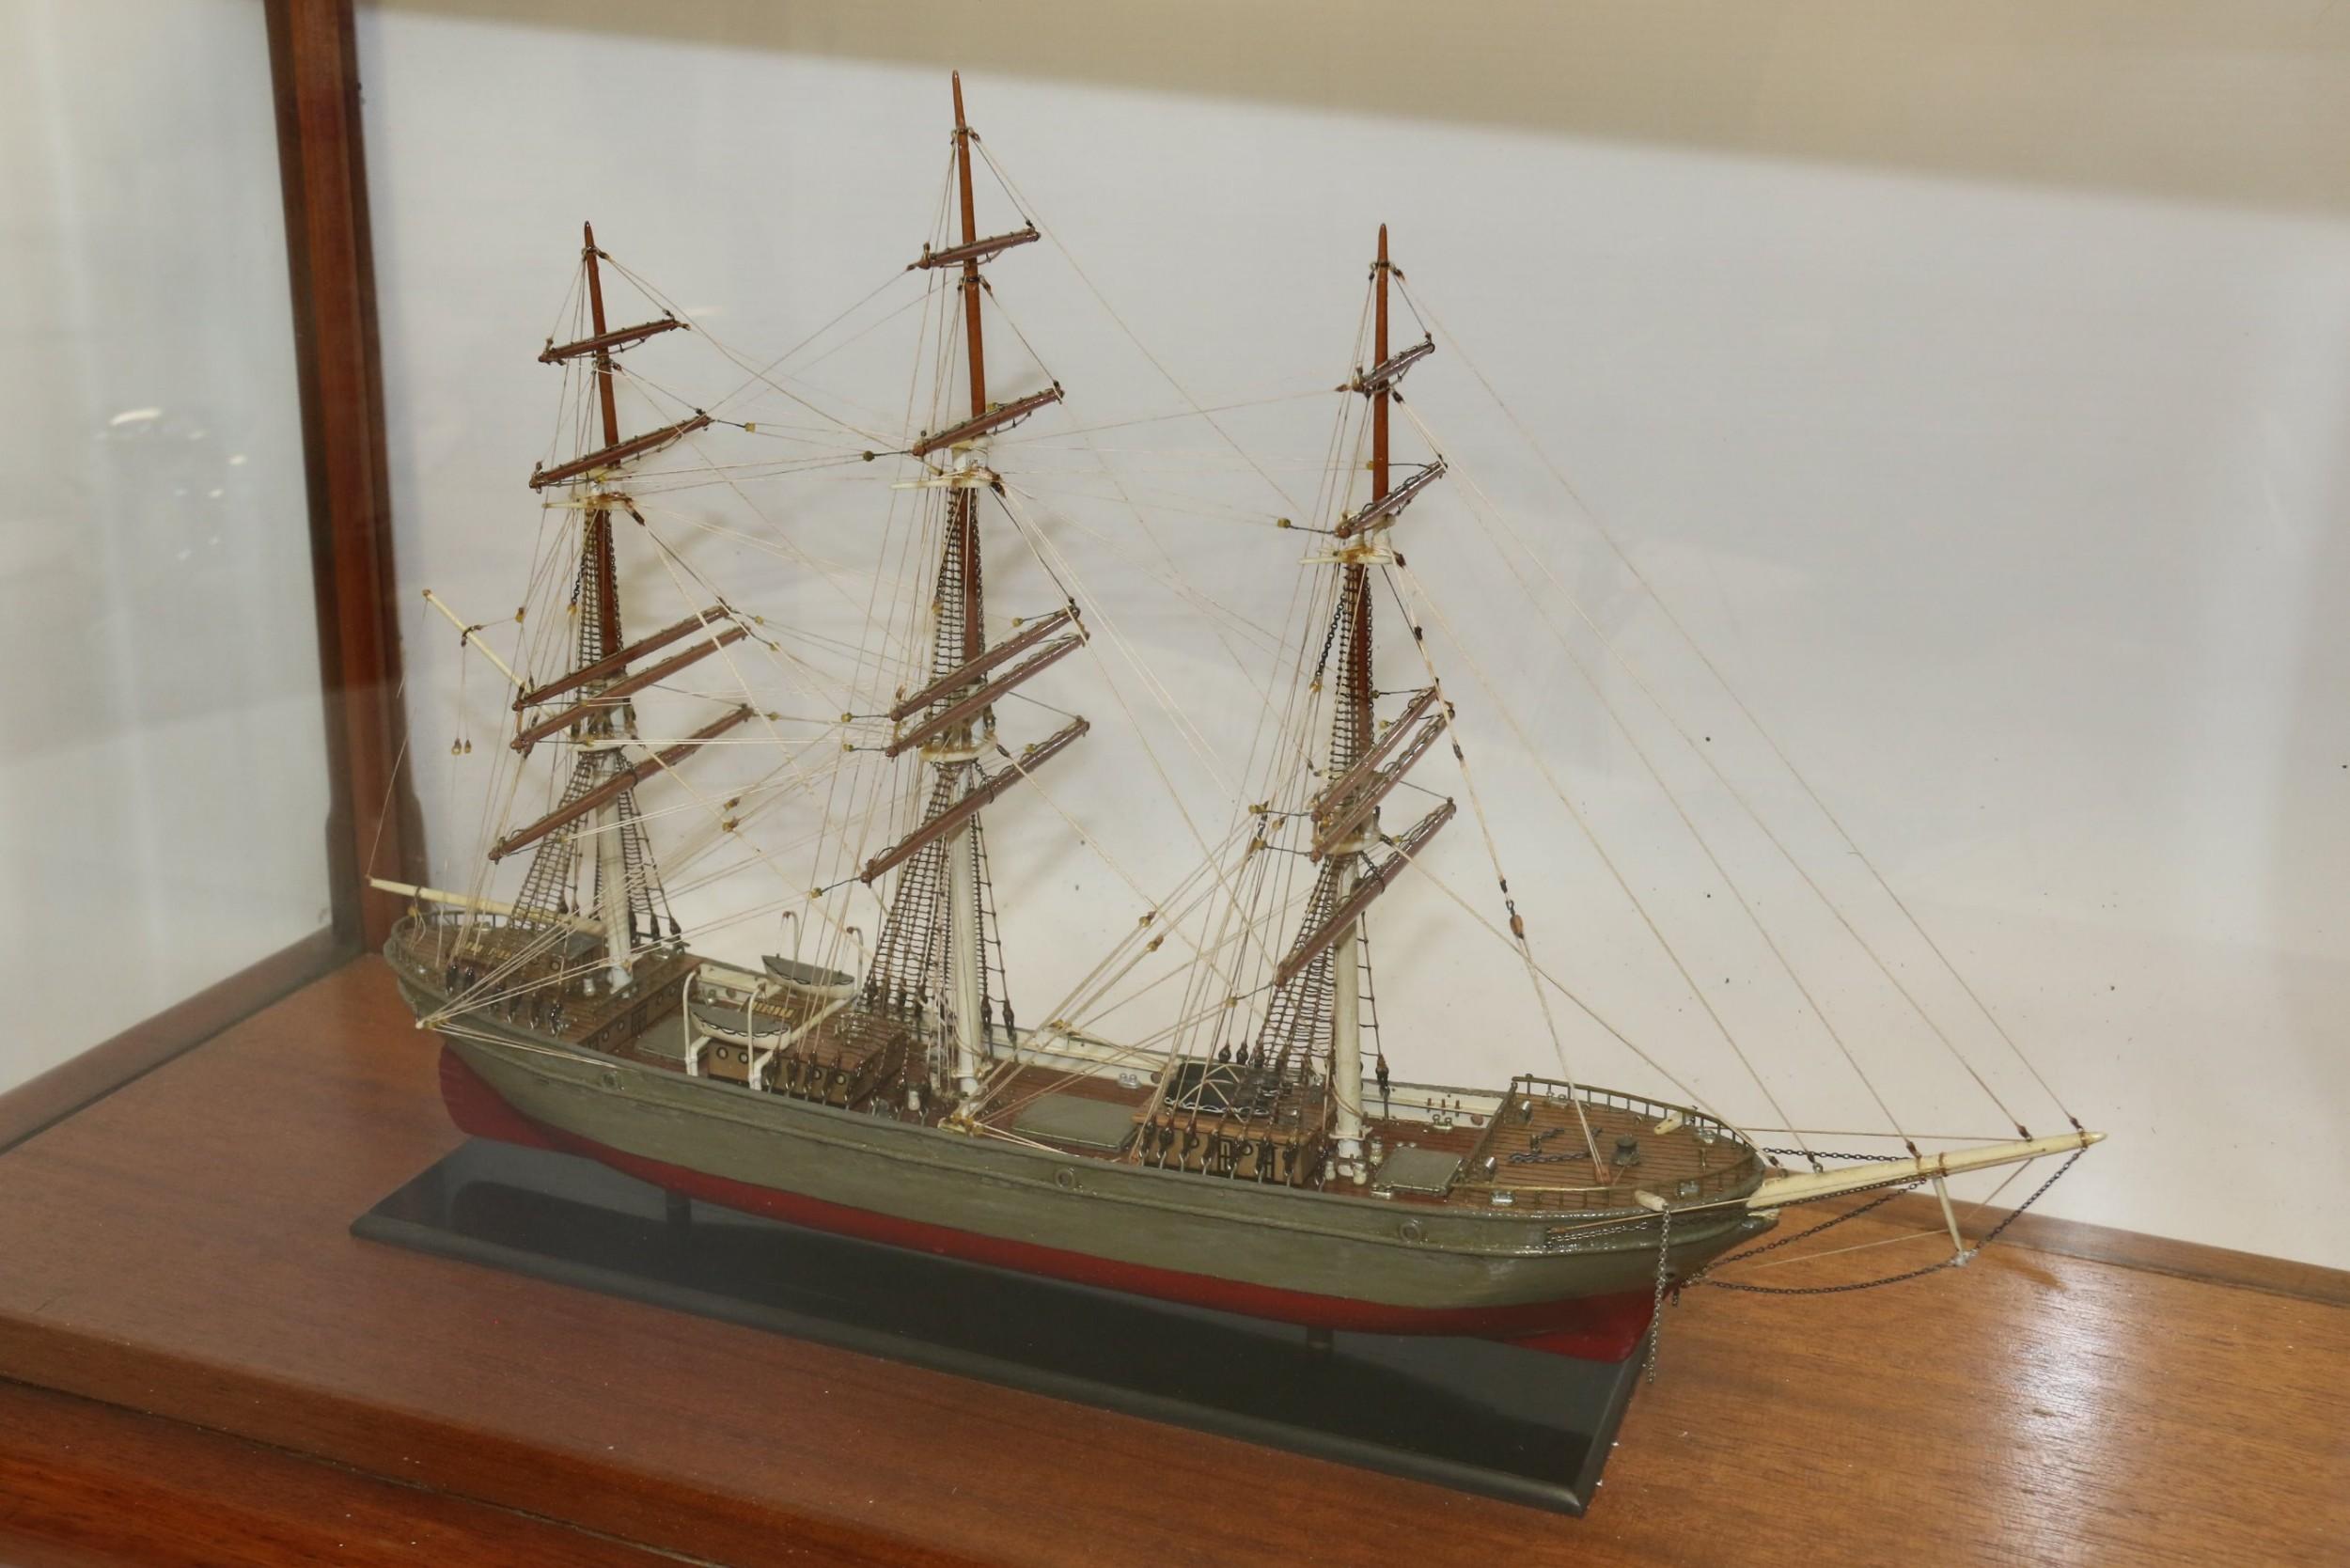 This scratch built scale model of an early 19th century three mast ship has been painstakingly built with great detail to the deck and rigging. It has a hand painted finish in red and grey and has been mounted in a bespoke period mahogany glazed